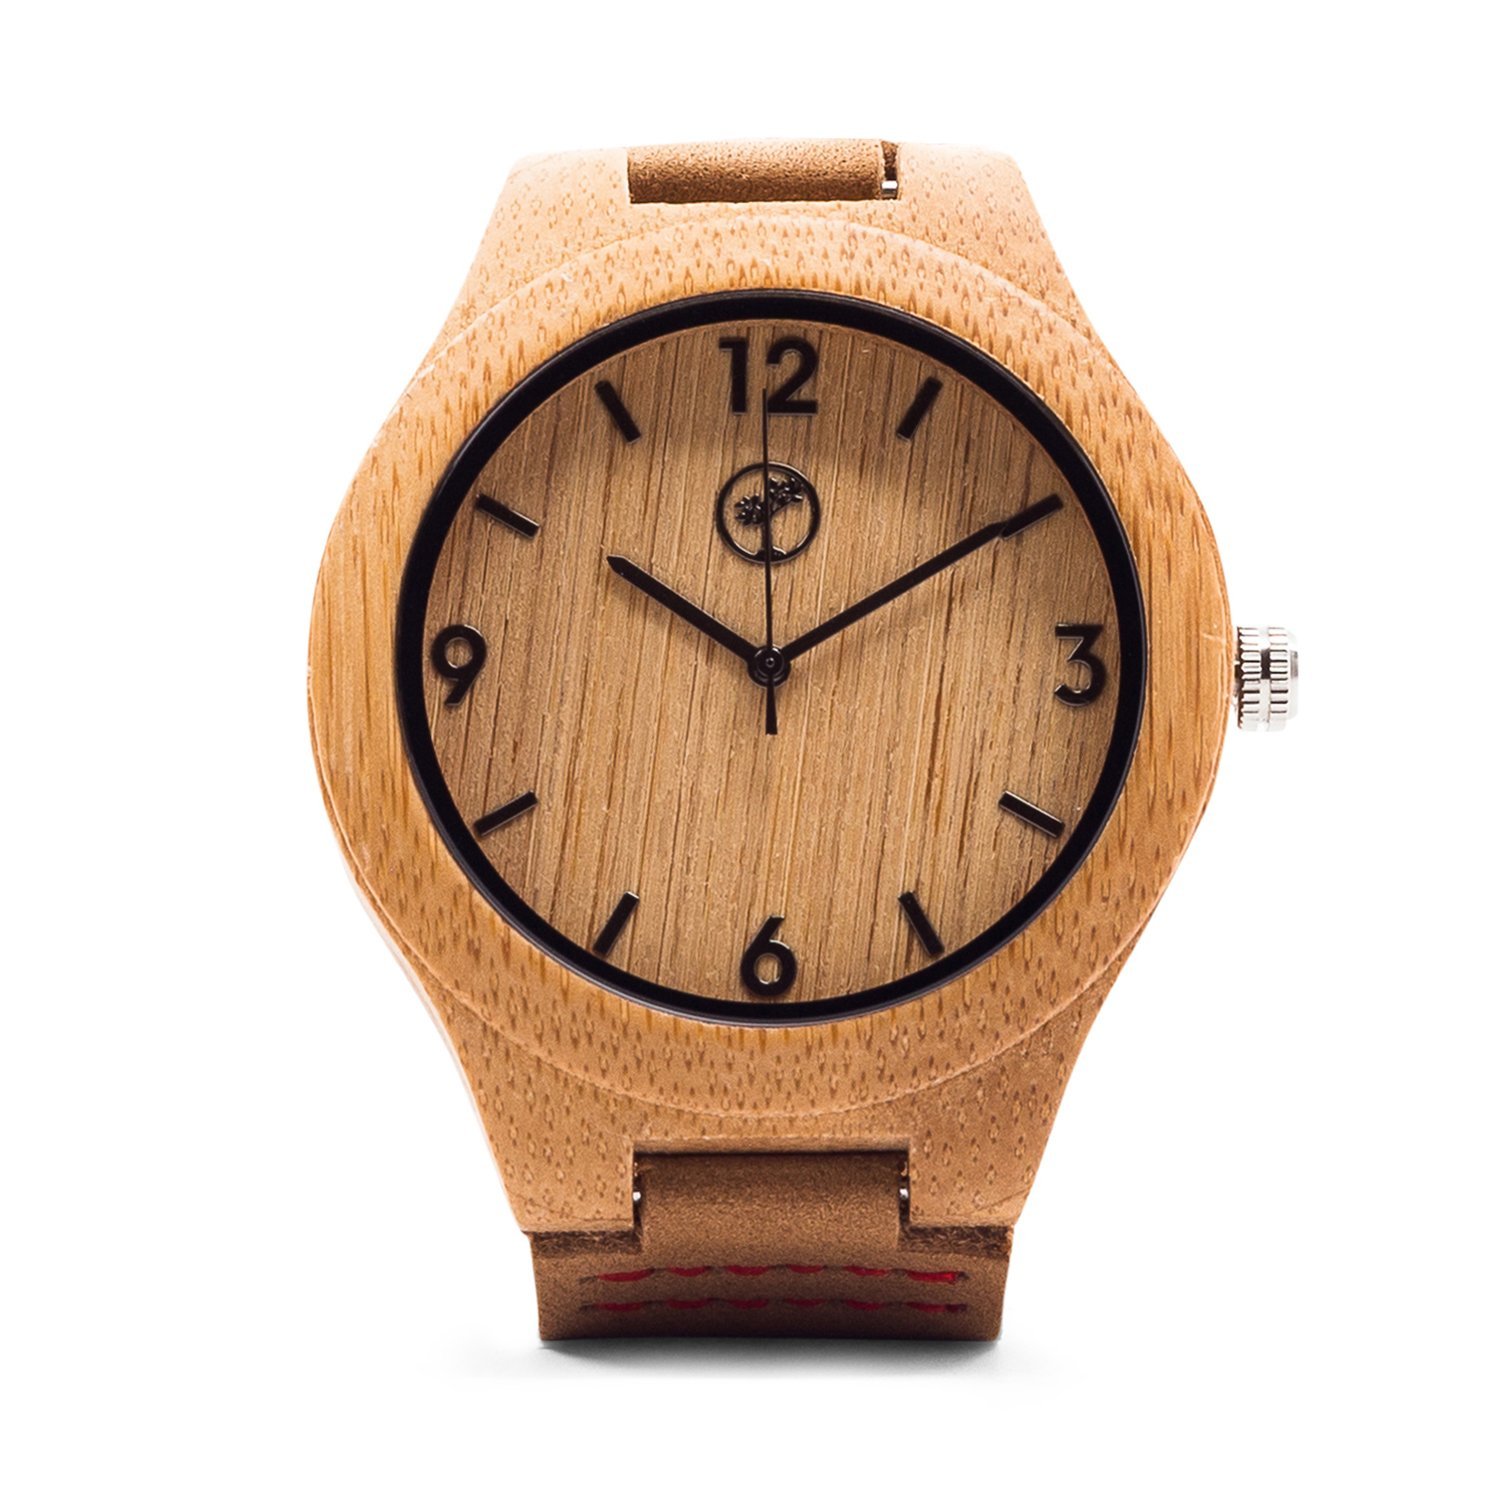 Amazon.com: Wooden Watch for Men by Tree People: Bamboo Wood Case ...